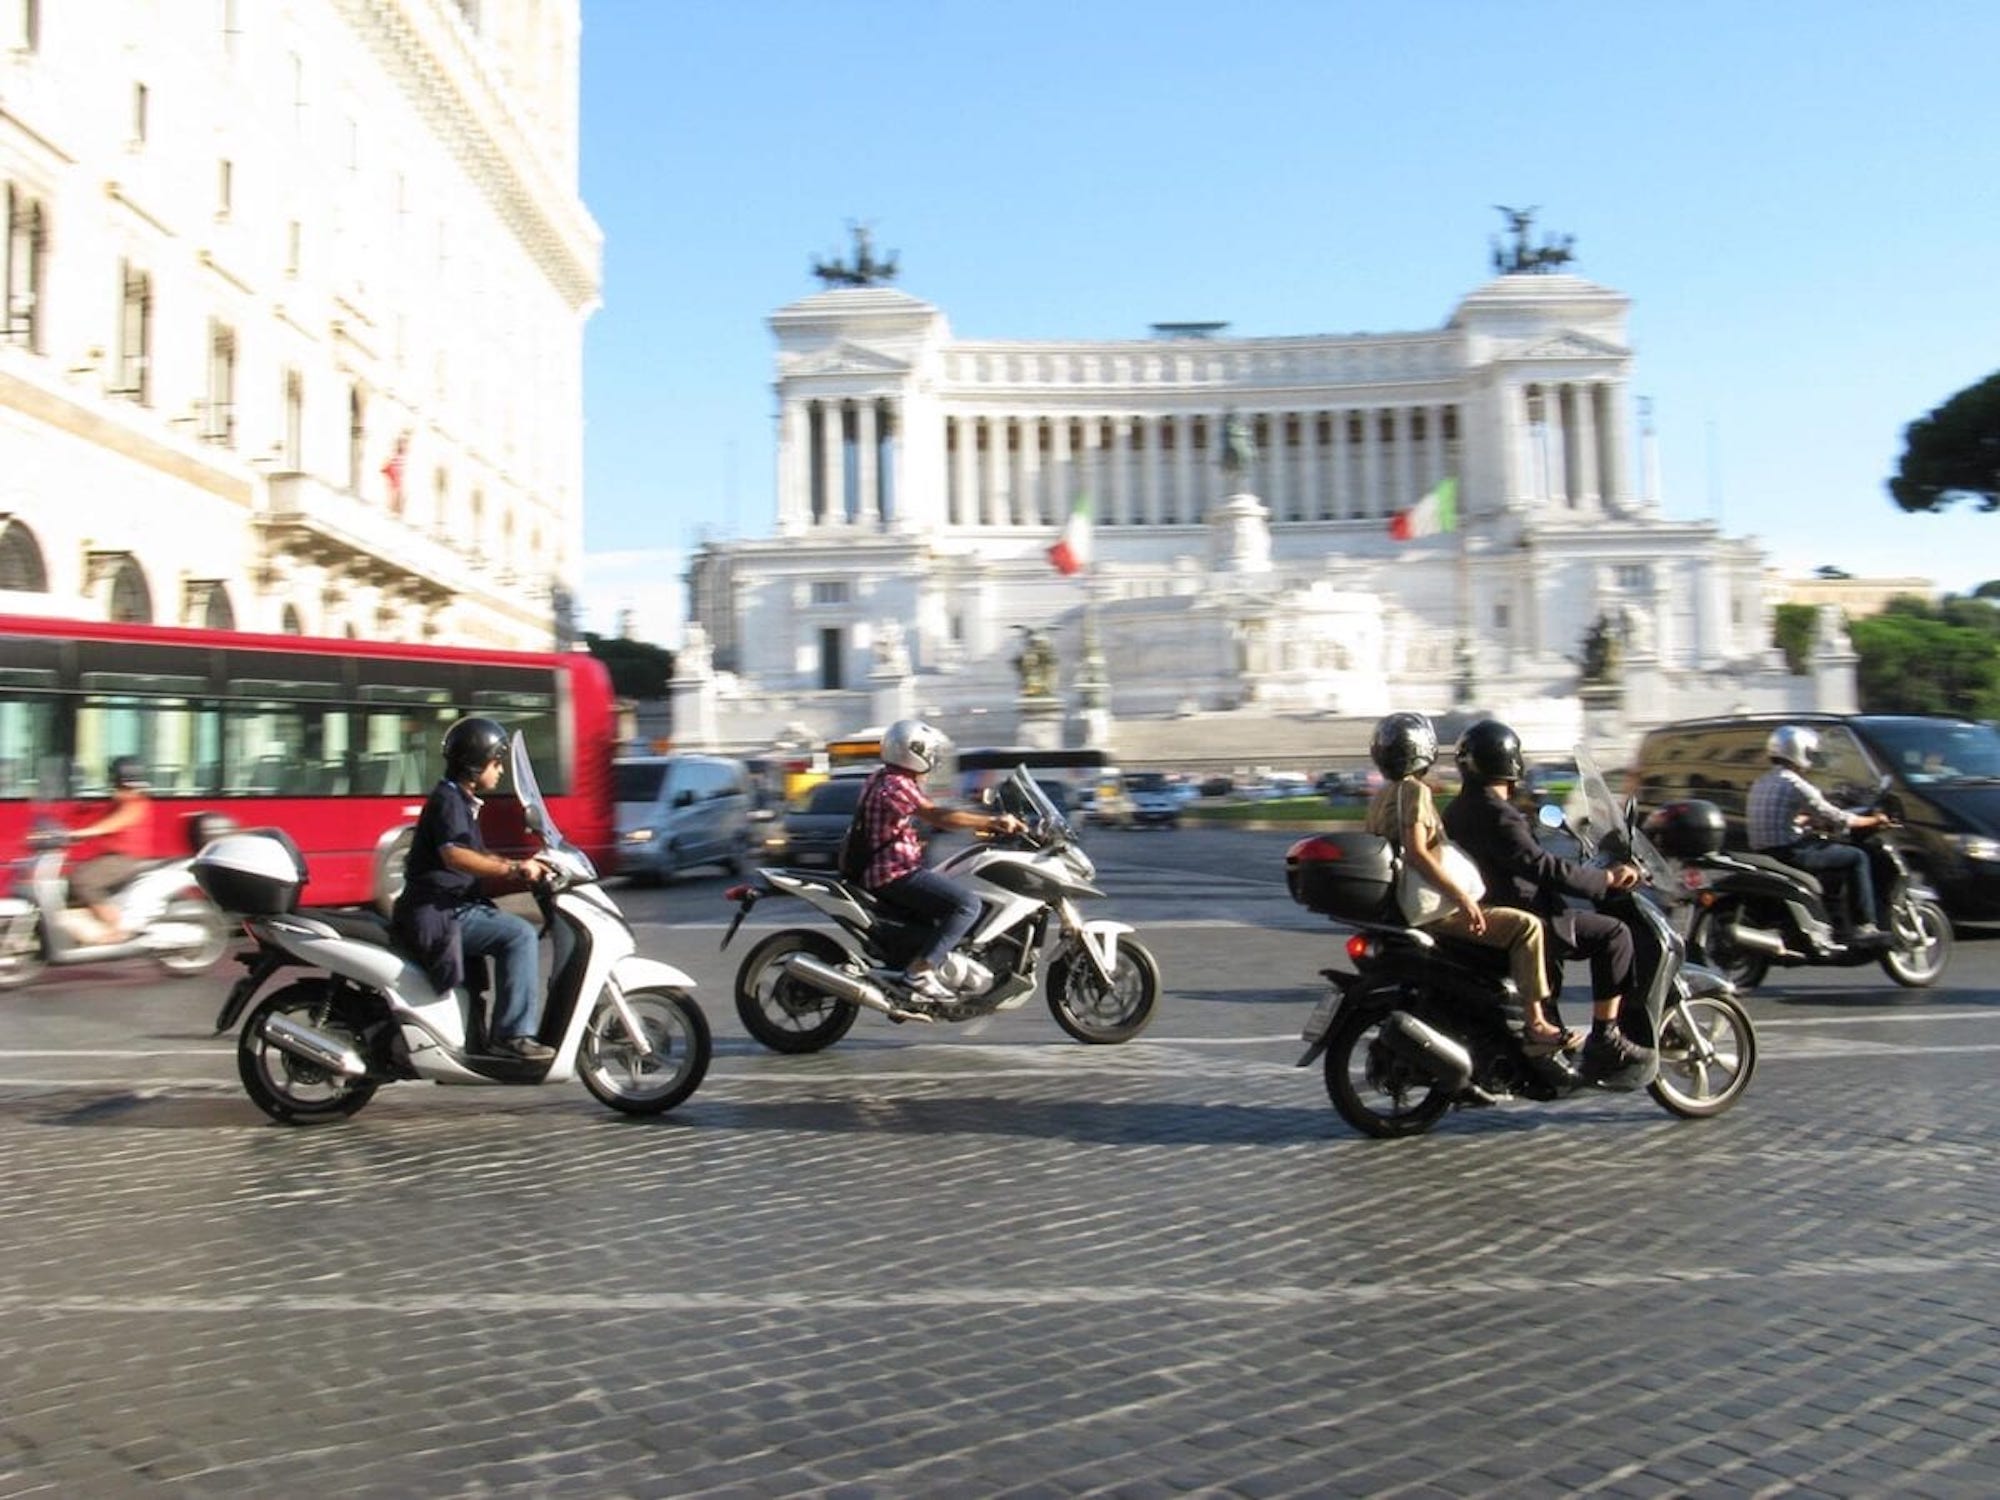 A few motorcyclists enjoying a scoot around some of Italy's points of interest. Media sourced from MS&L.